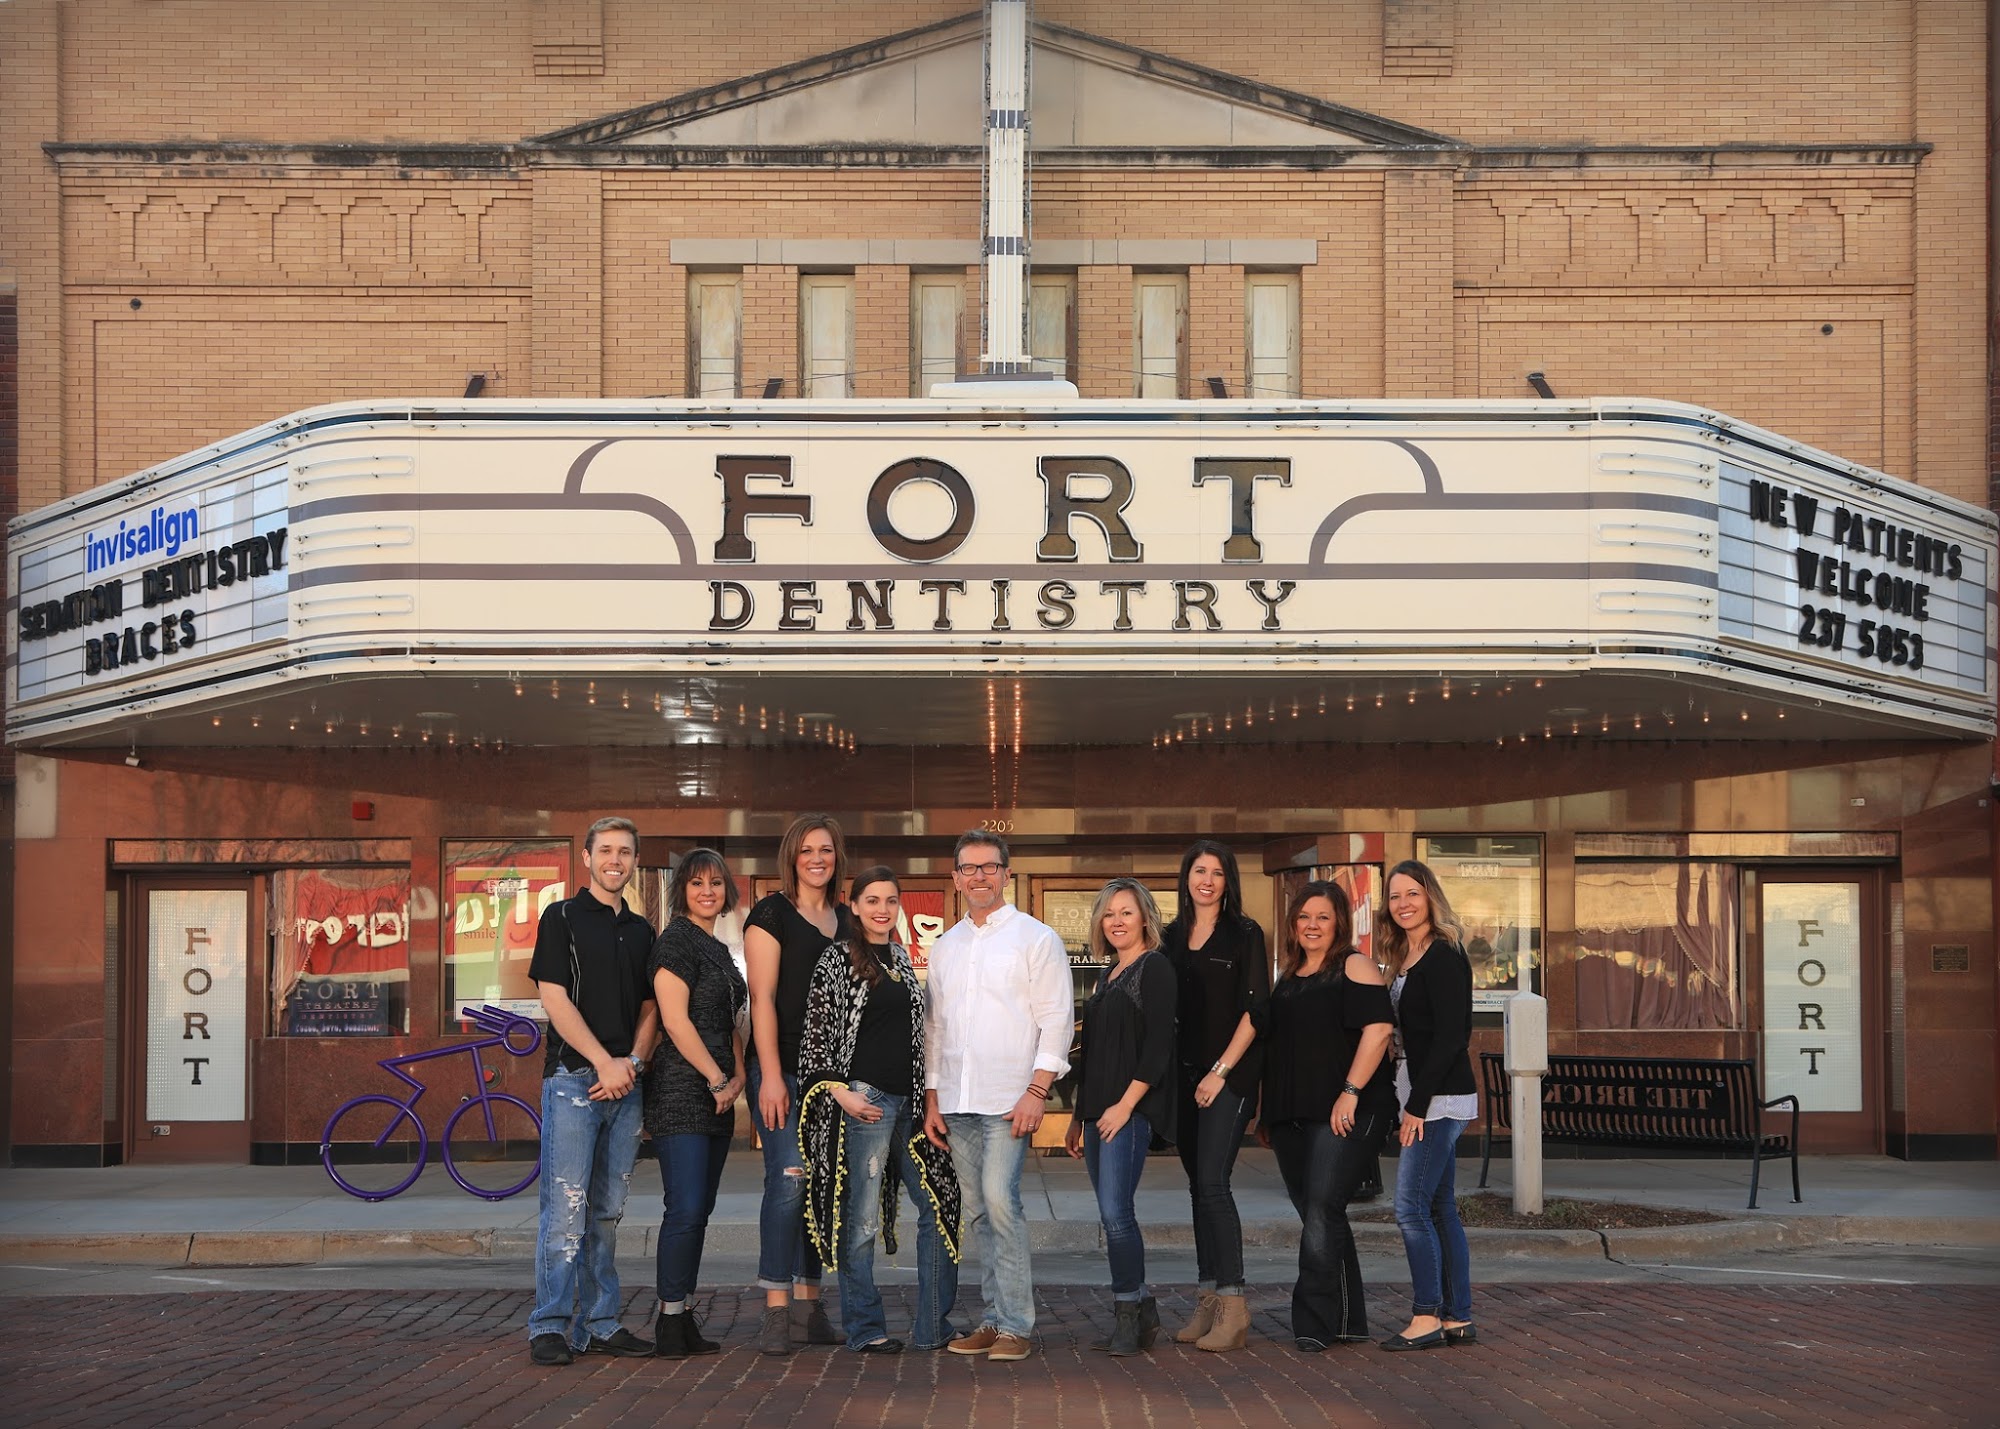 Fort Theatre Dentistry